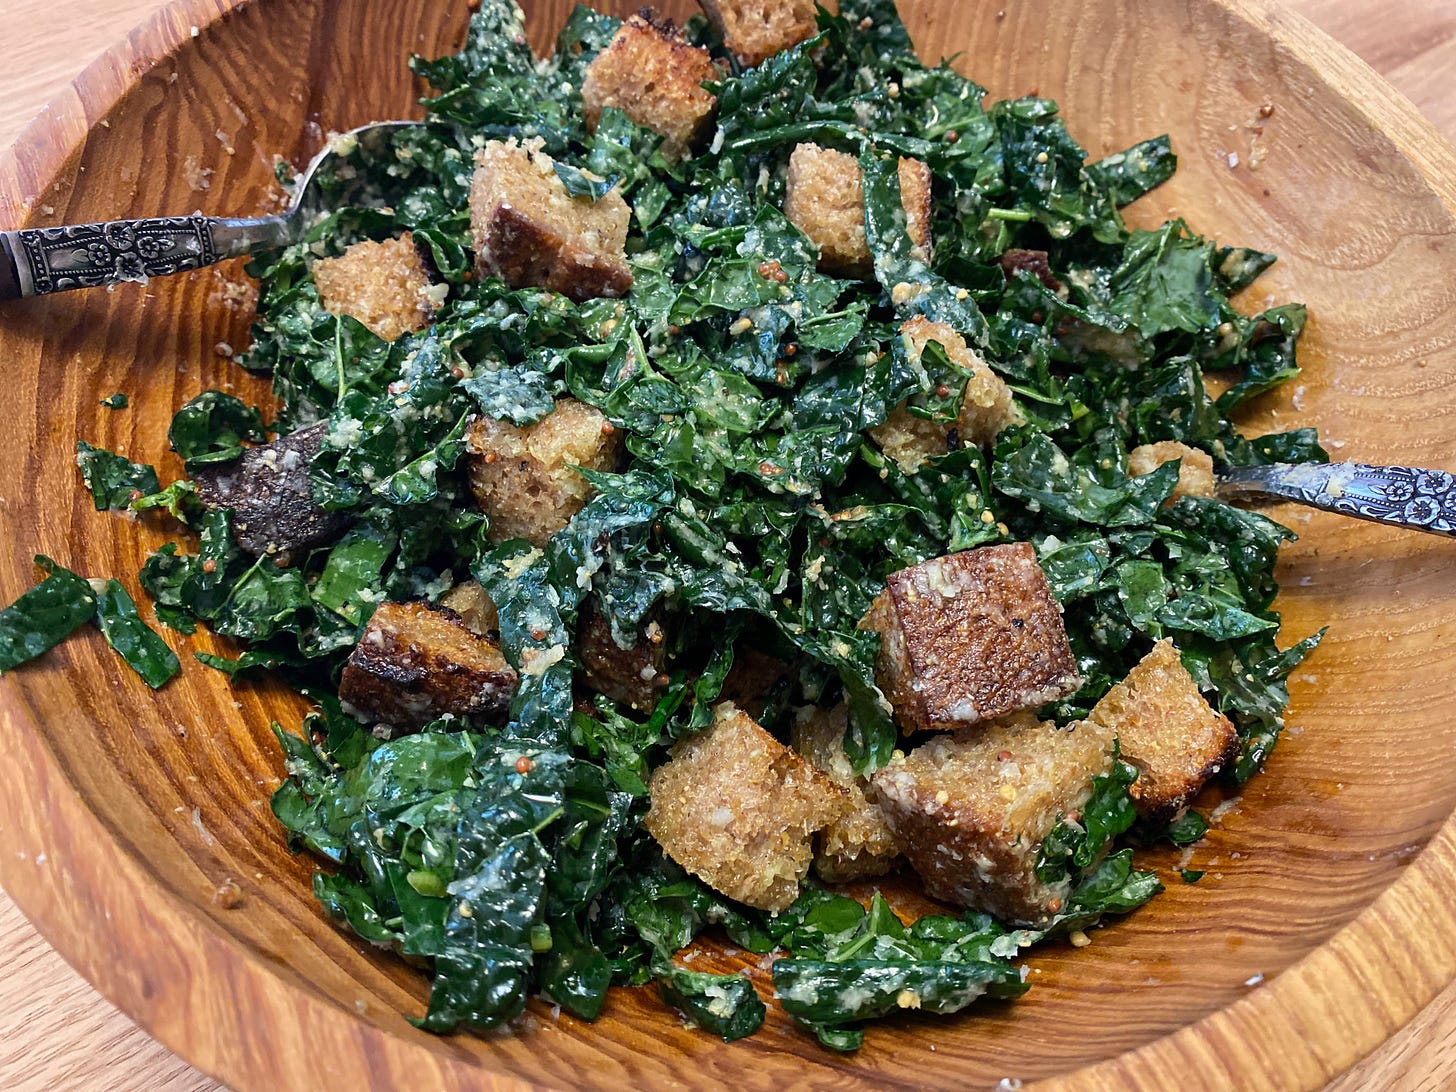 Closeup of a raw kale salad in a wooden bowl.